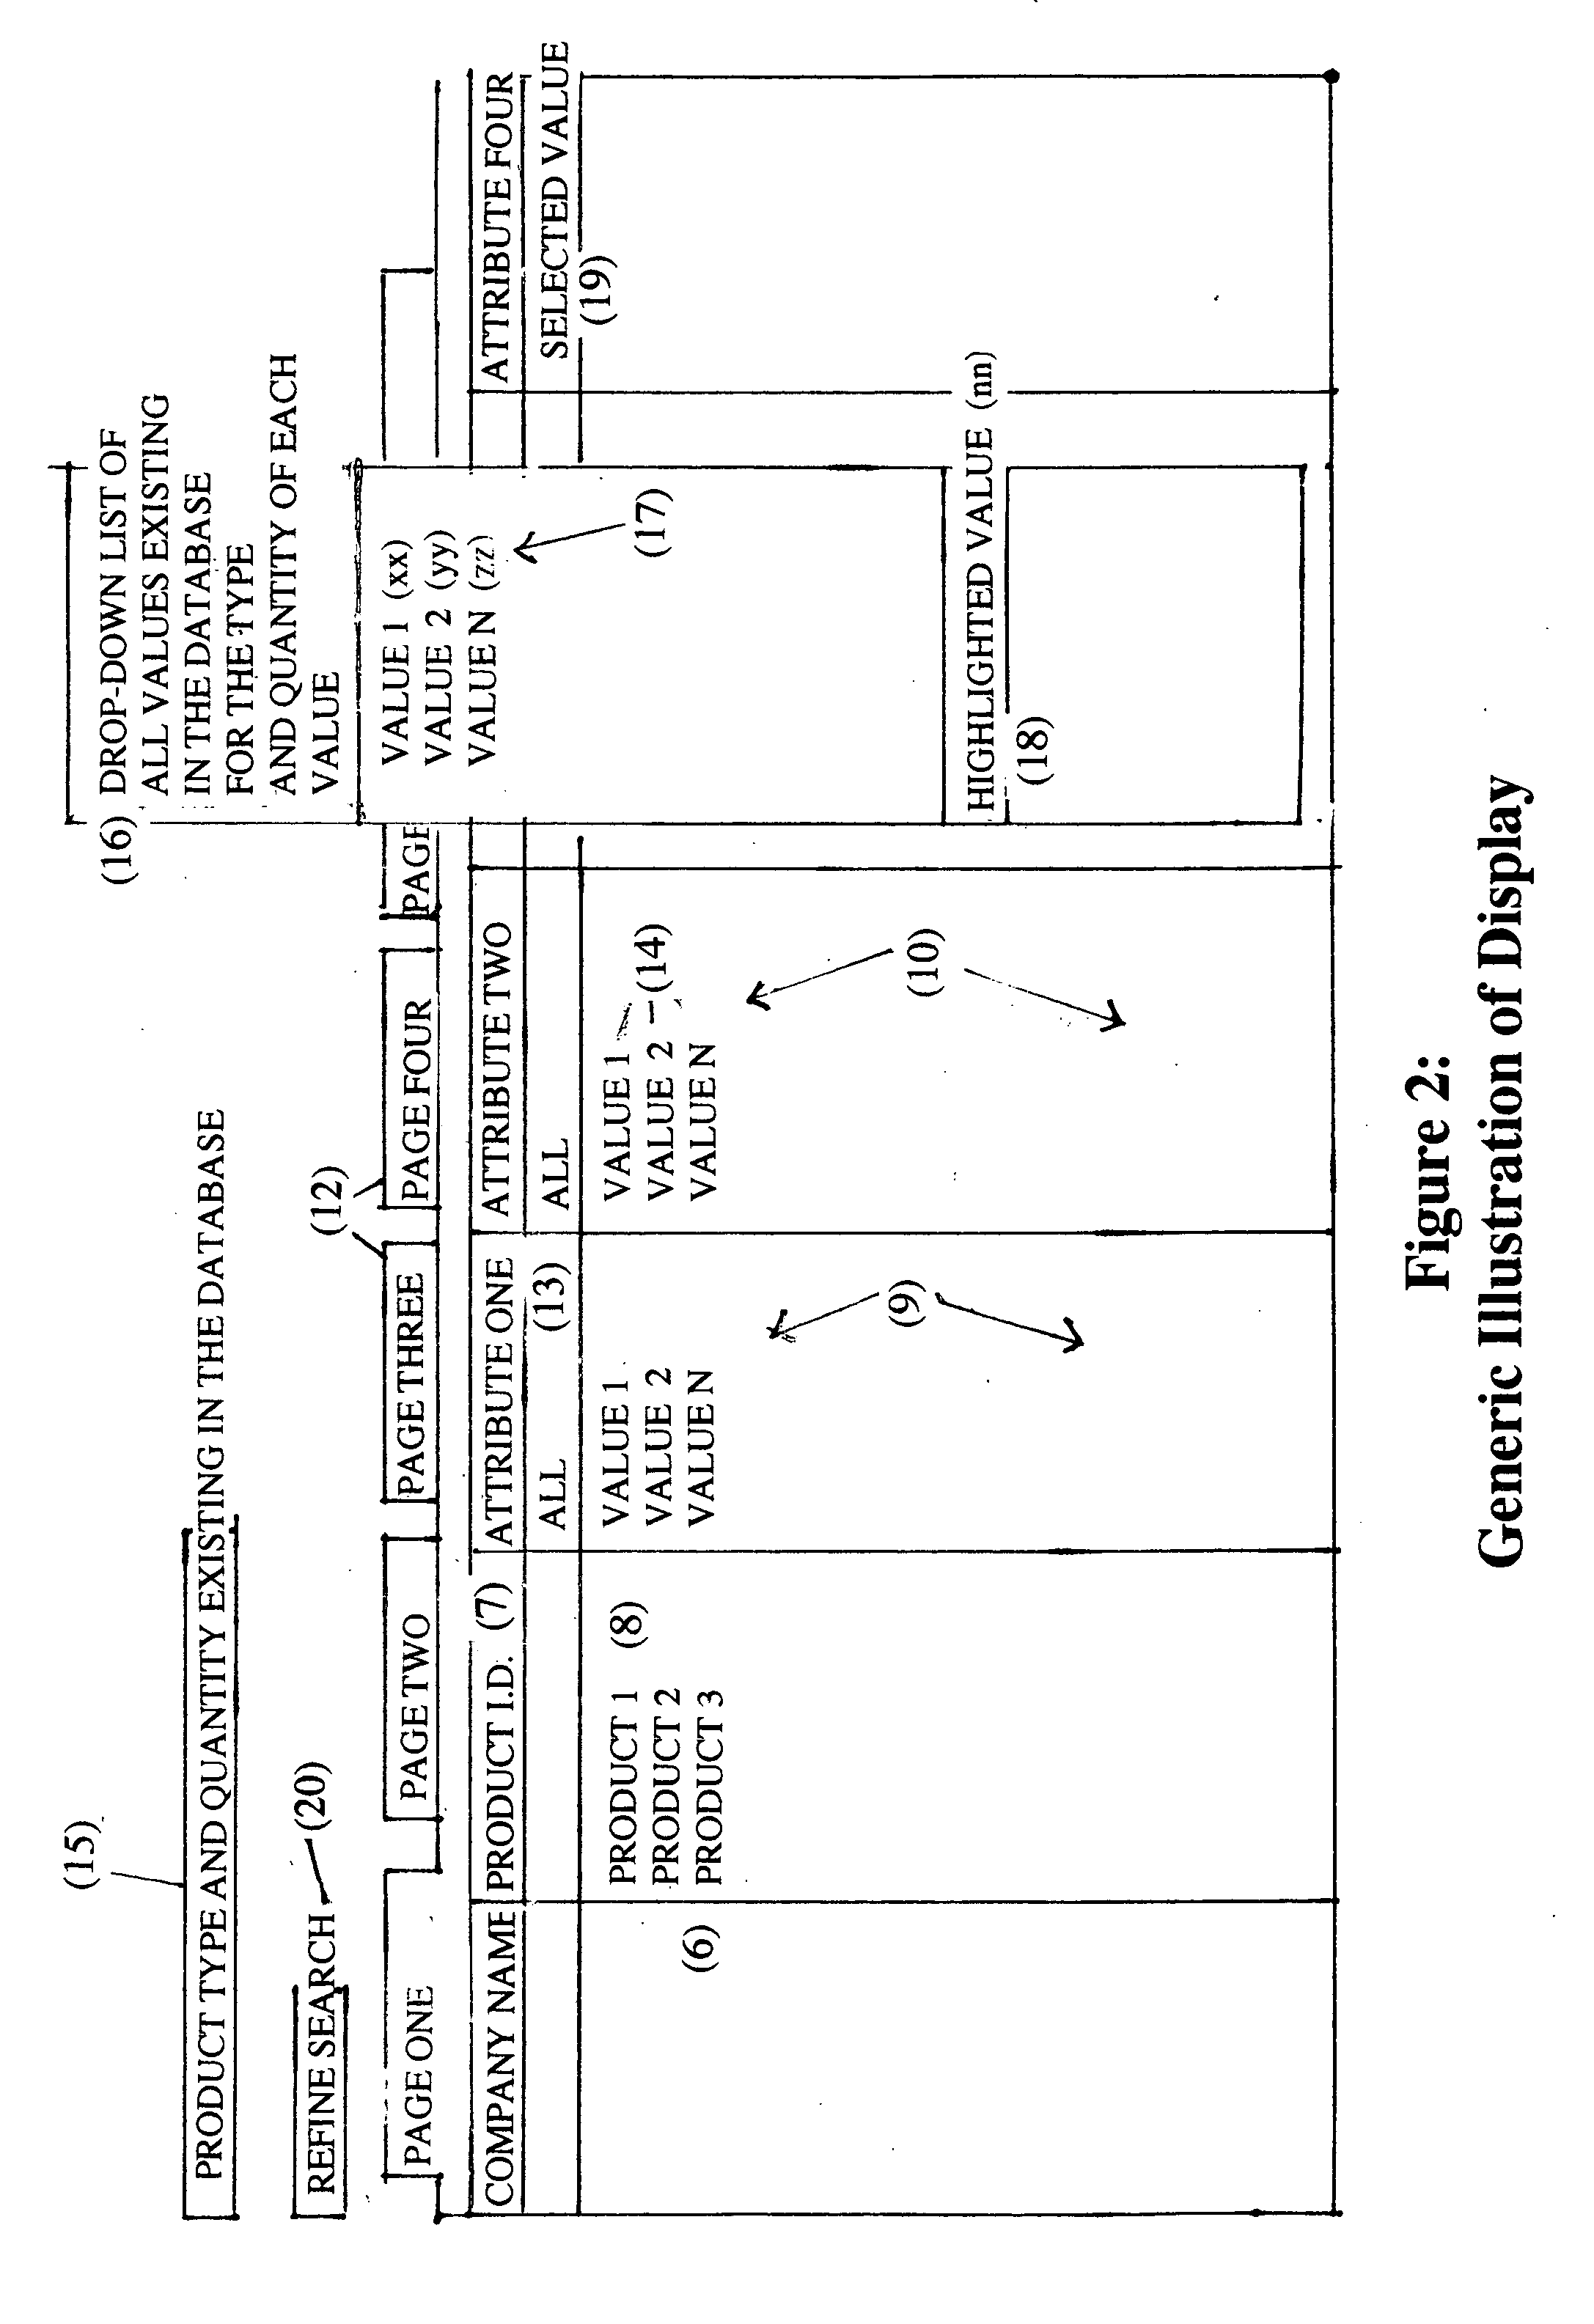 Schechinger/Fennell System and method for filtering search results by utilizing user-selected parametric values from a self-defined drop-down list on a website"